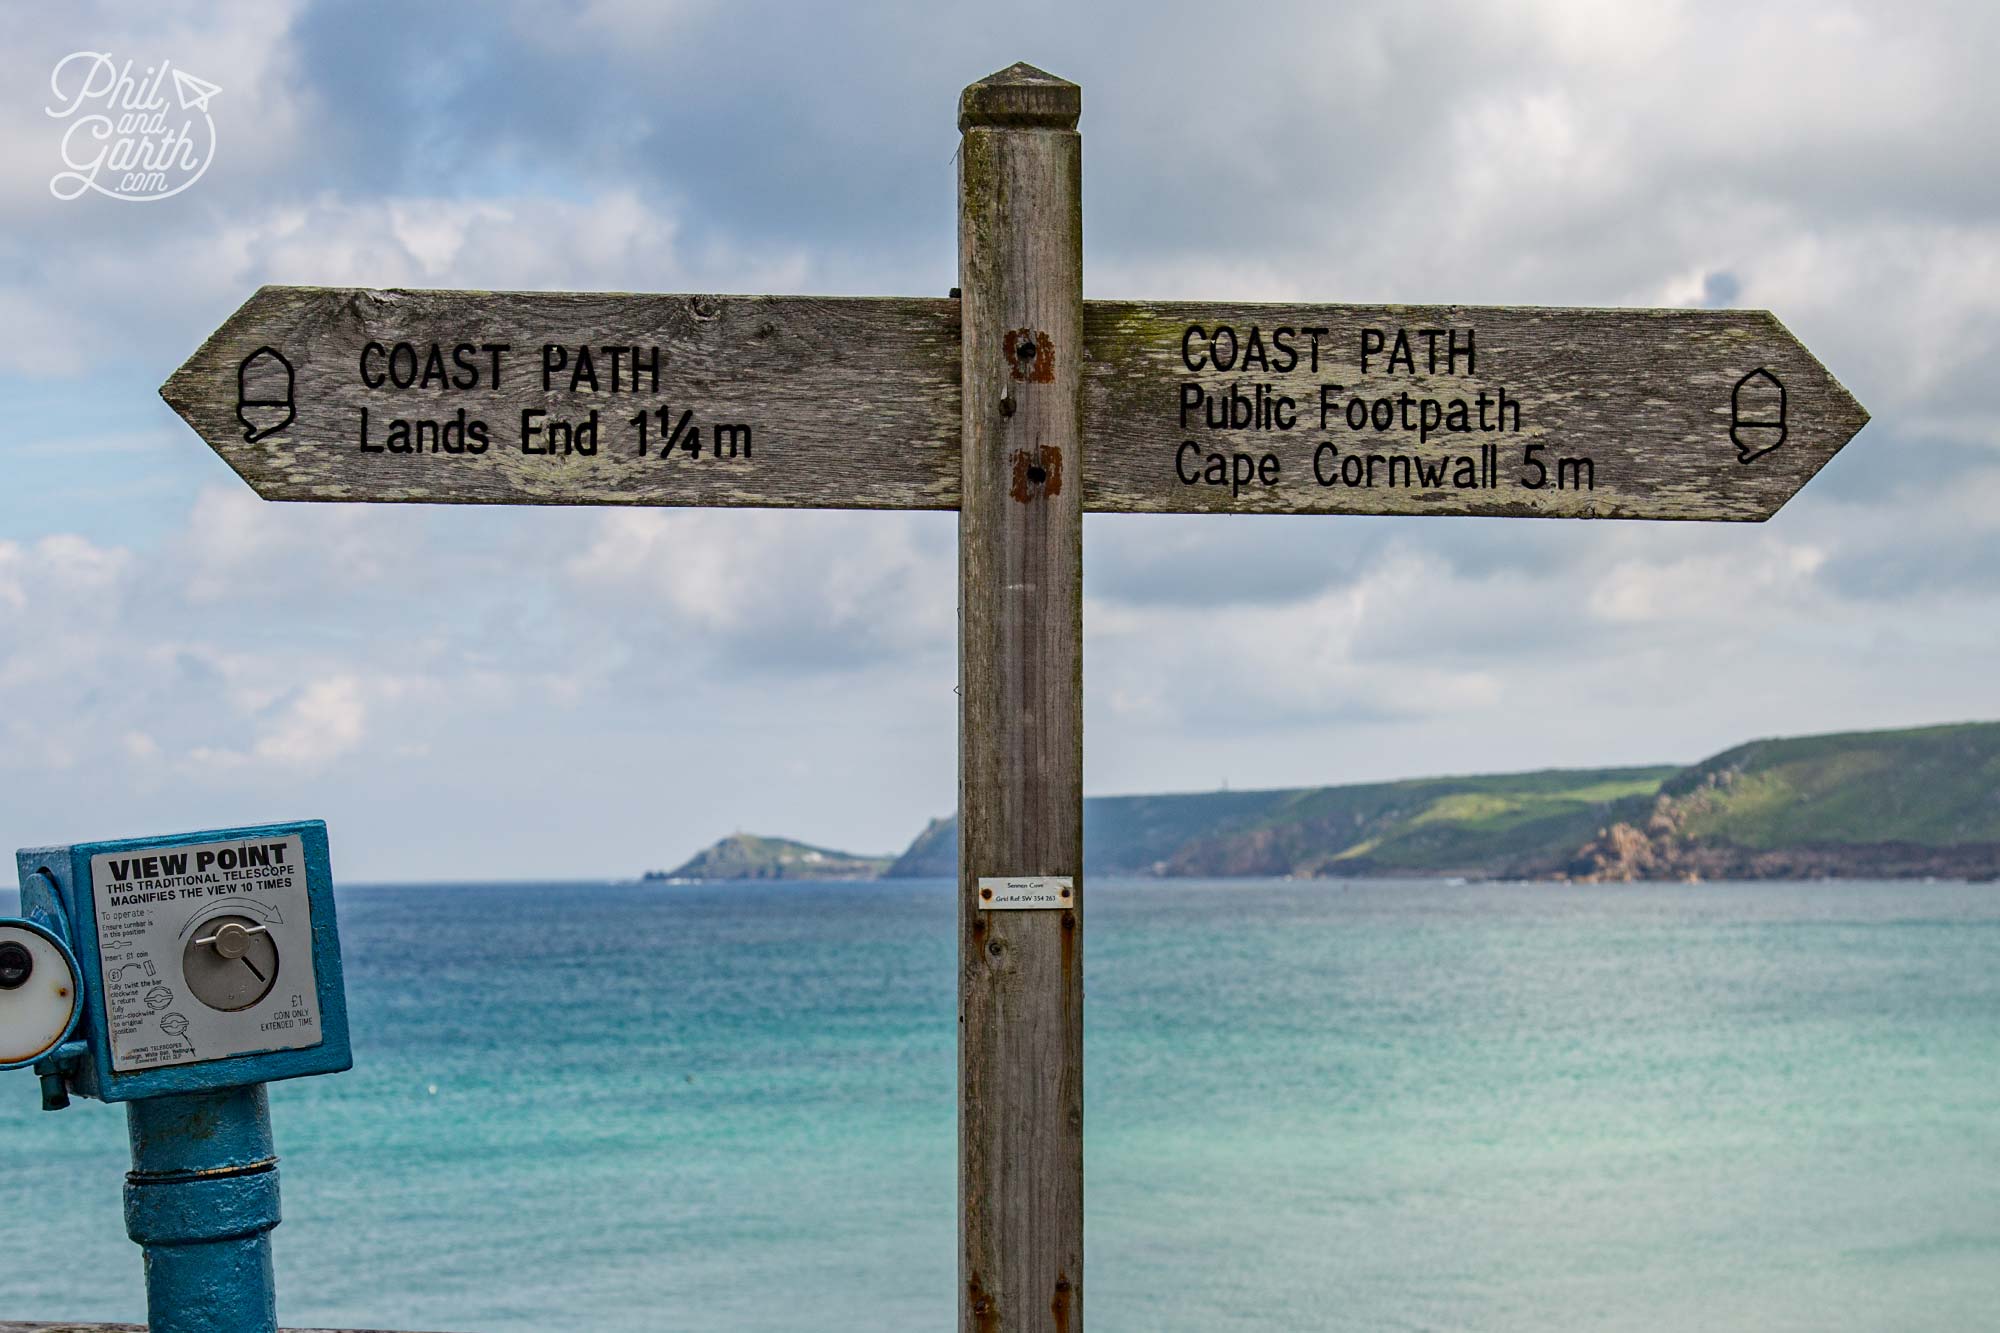 We walked the Coast Path from Sennen Cove to Land's End